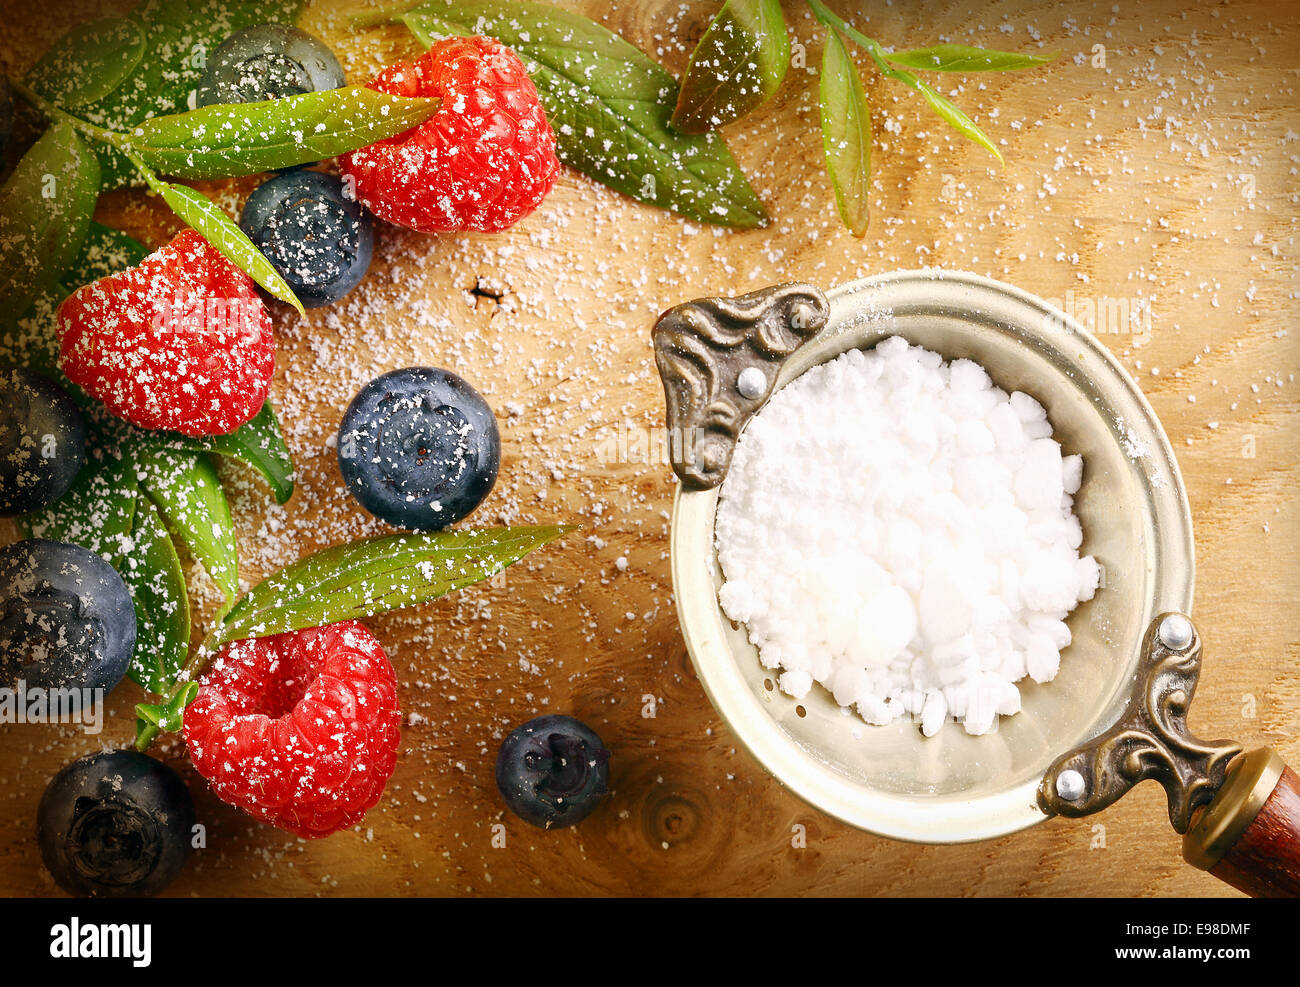 Fresh selection of mixed berries with granulated sugar in a strainer including raspberries and blueberries sprinkled with fine sugar on a wooden background Stock Photo